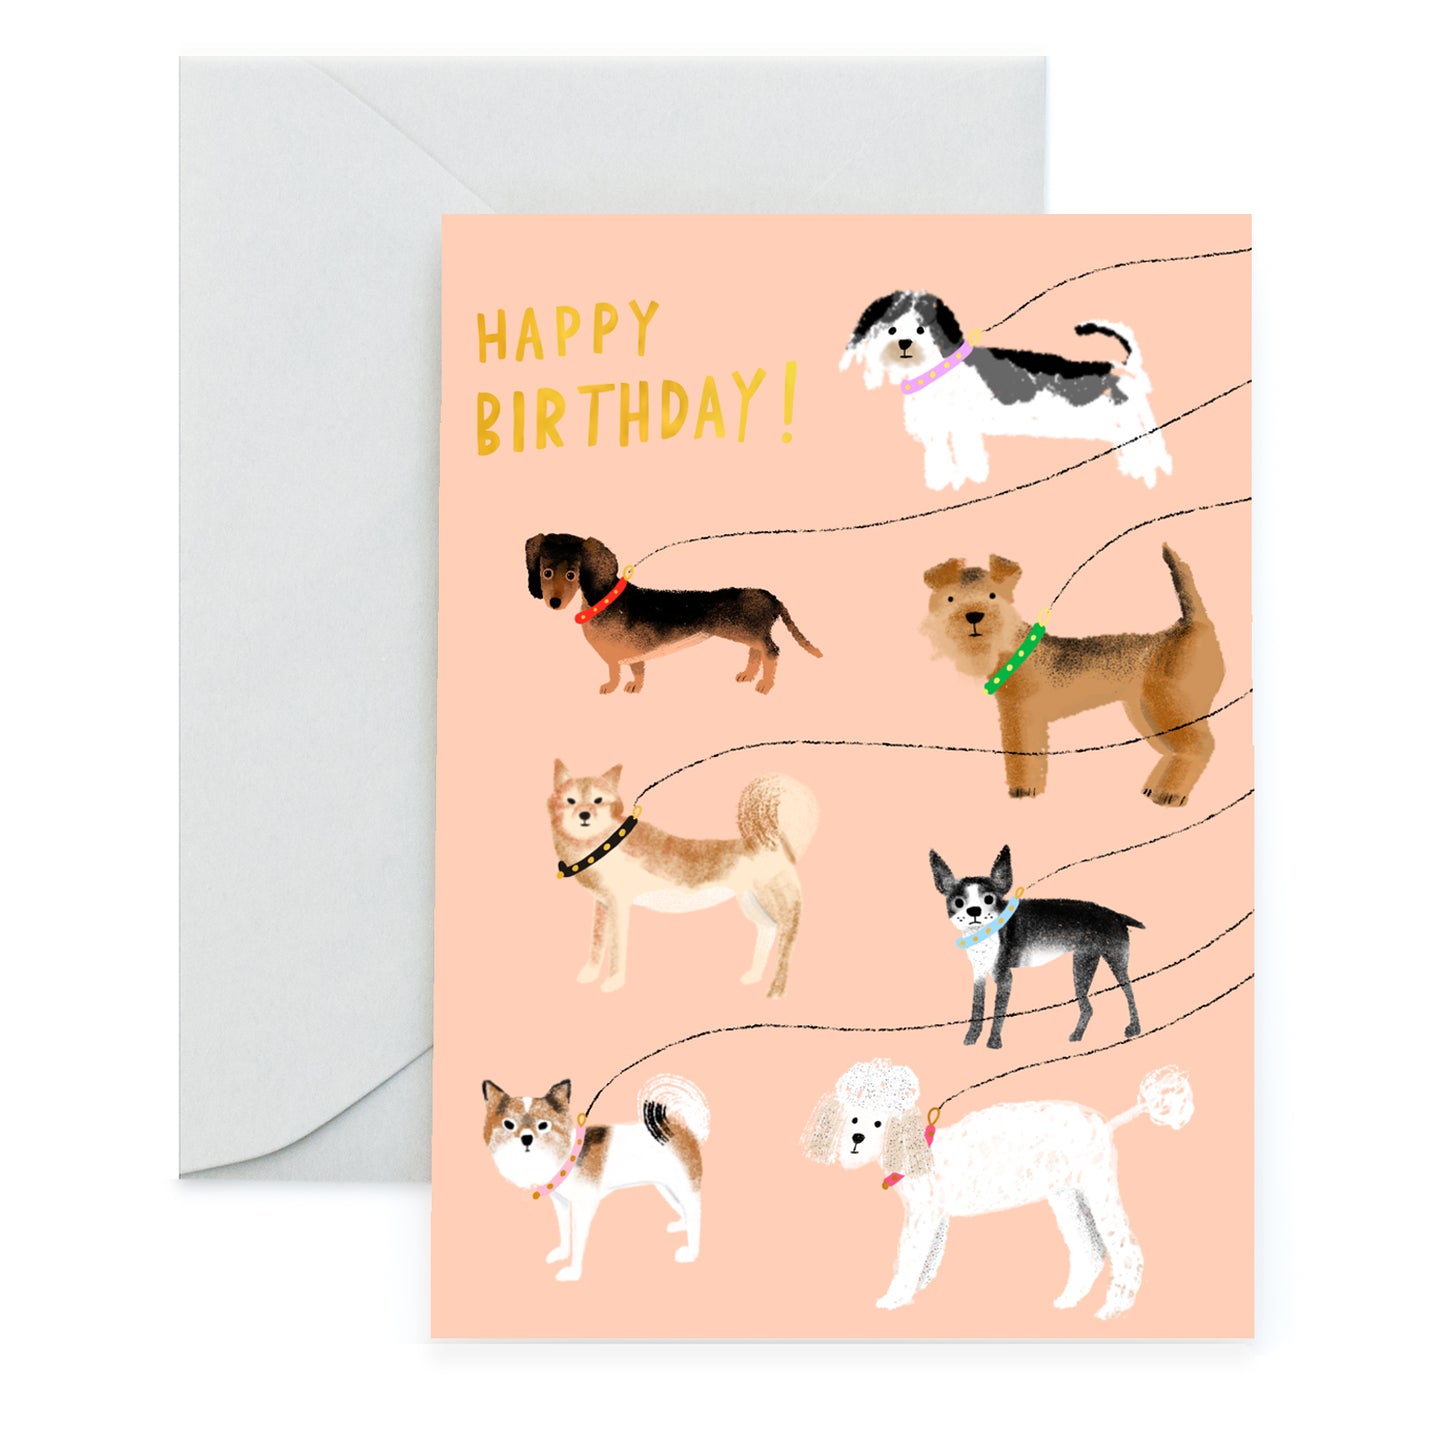 OUT FOR A WALK 2020 - Birthday Card